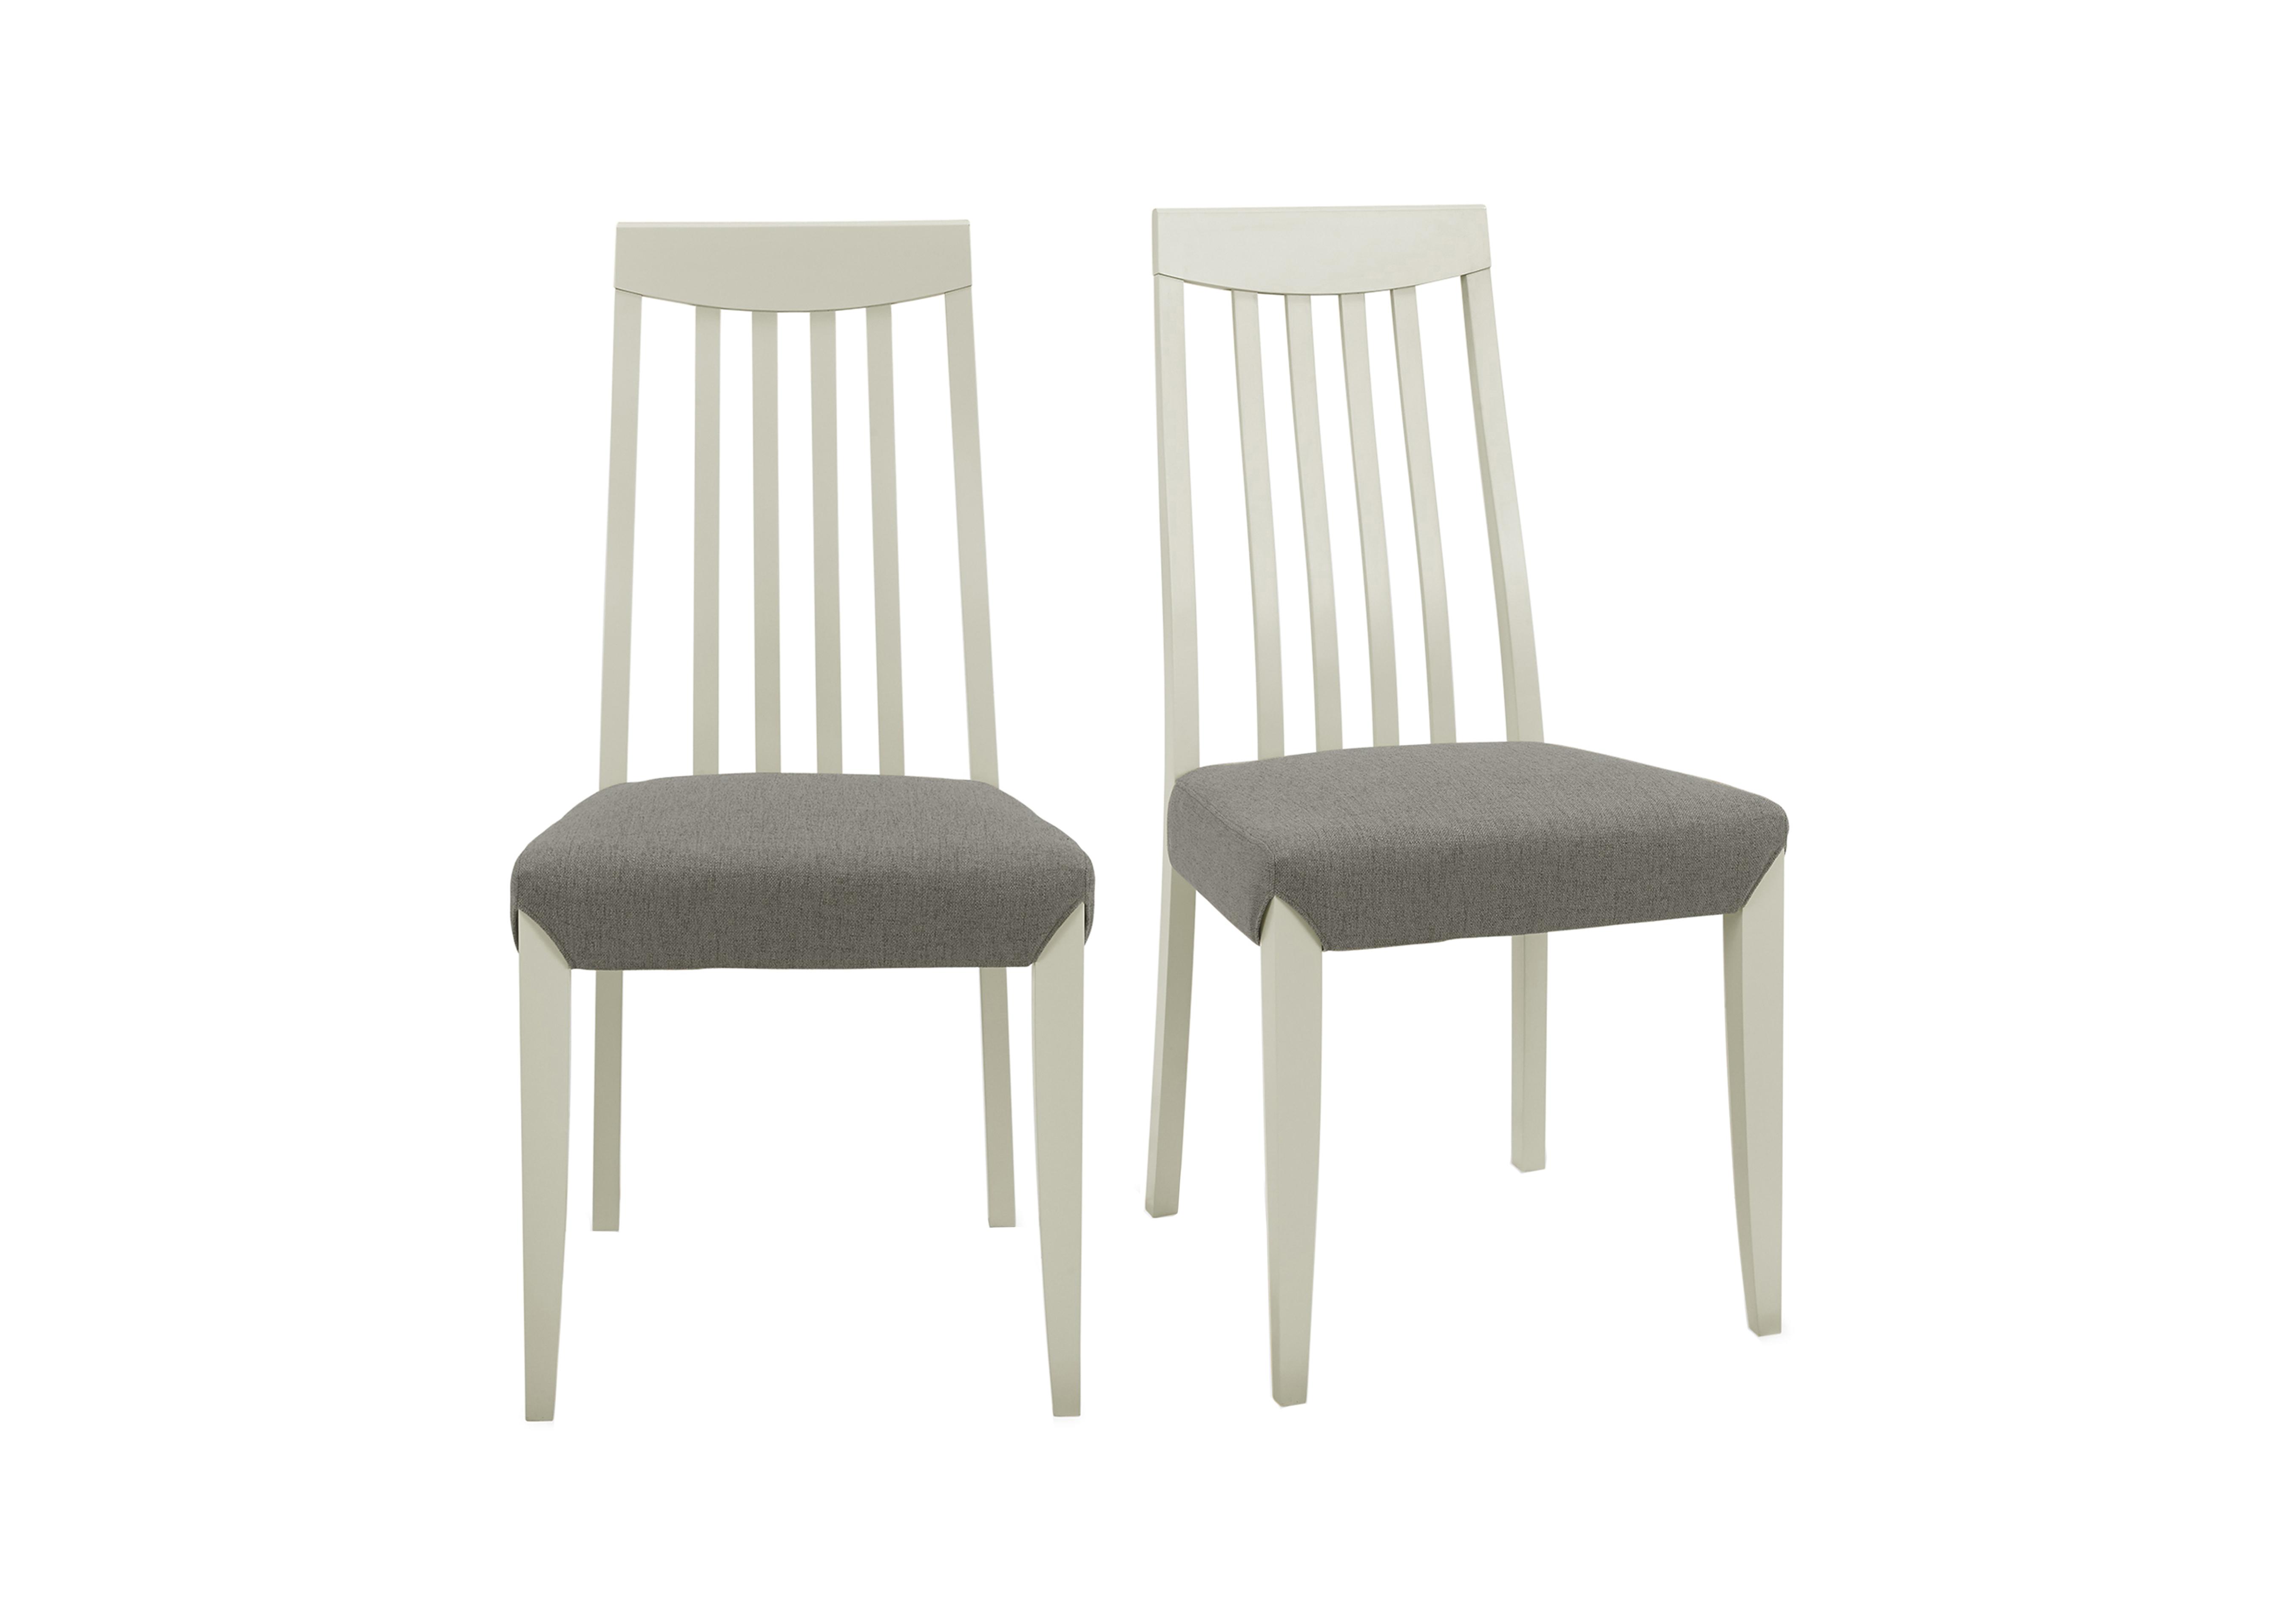 Skye Pair of Tall Slatted Chairs in Two Tone/Titanium on Furniture Village